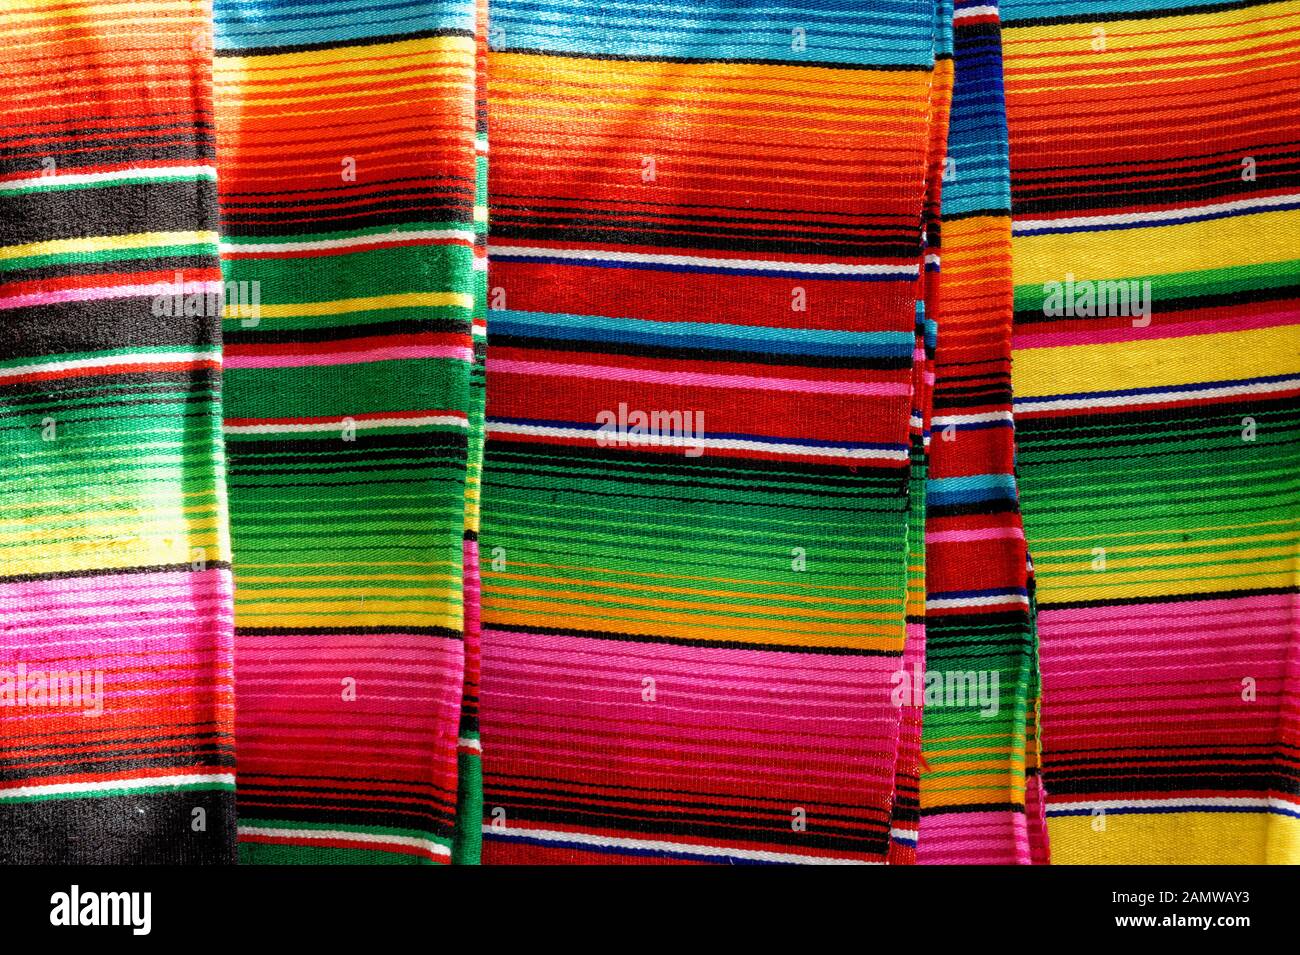 Colorful Mexican Blankets in Mercado 28 souvenirs and handicrafts market in Cancun, Mexico Stock Photo